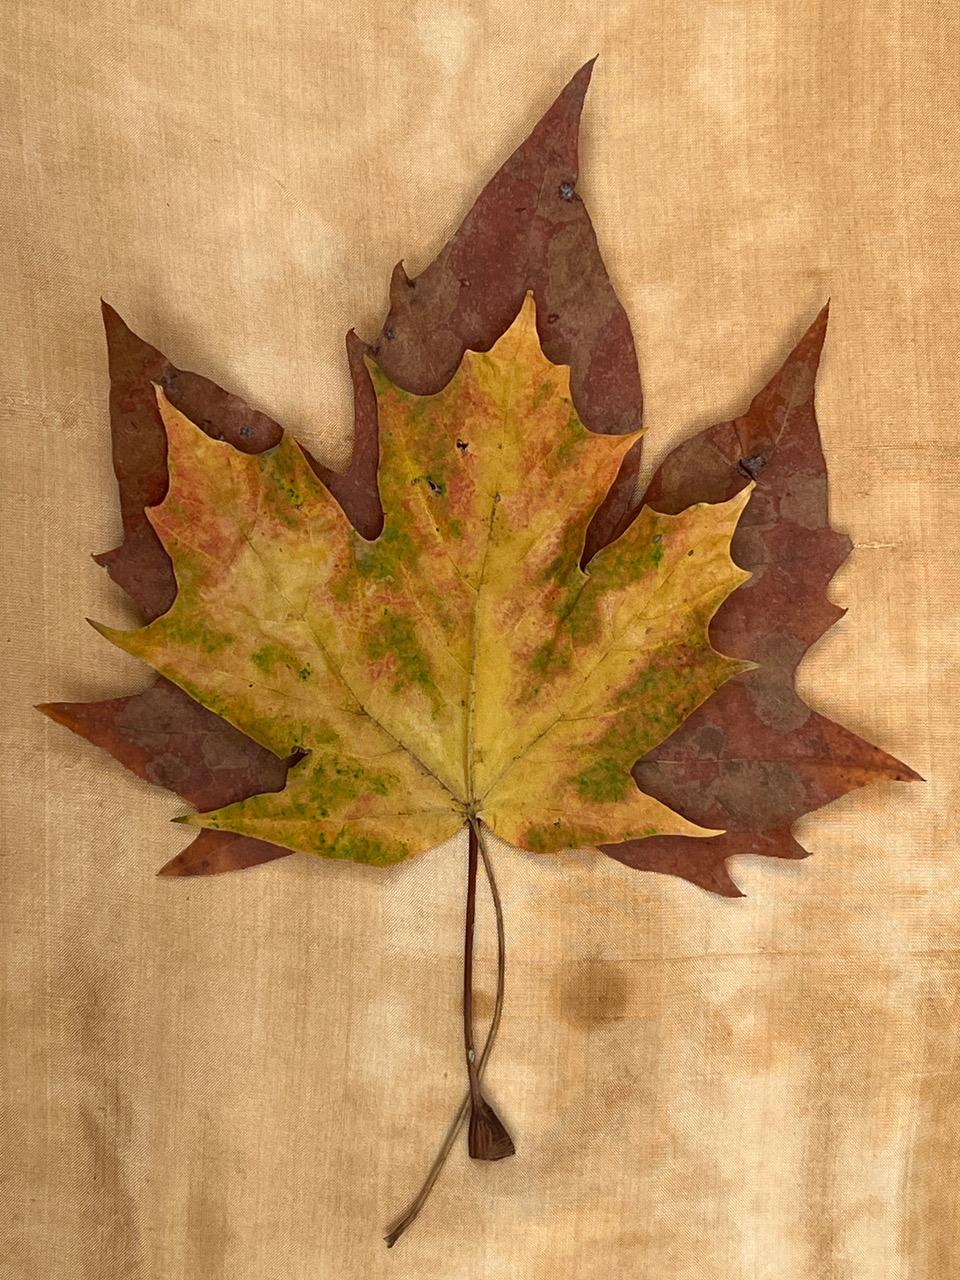 Nine Leaves: grid w/ nature still life leaf photographs in gold, red, green - Photograph by Paul Cava